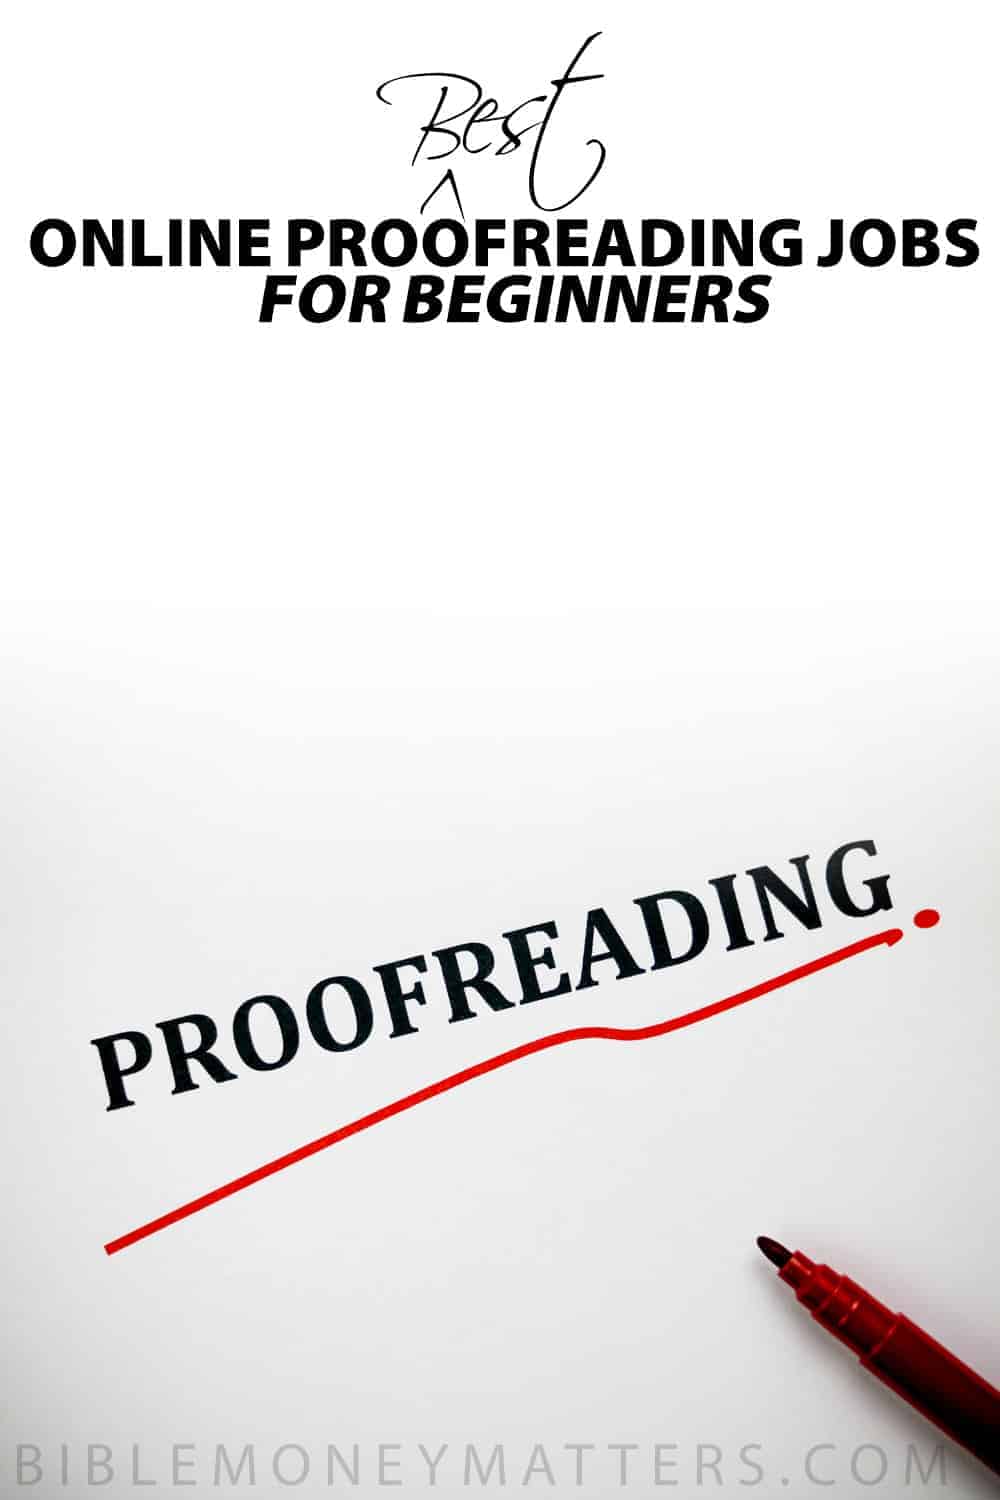 Online Proofreading Jobs For Beginners